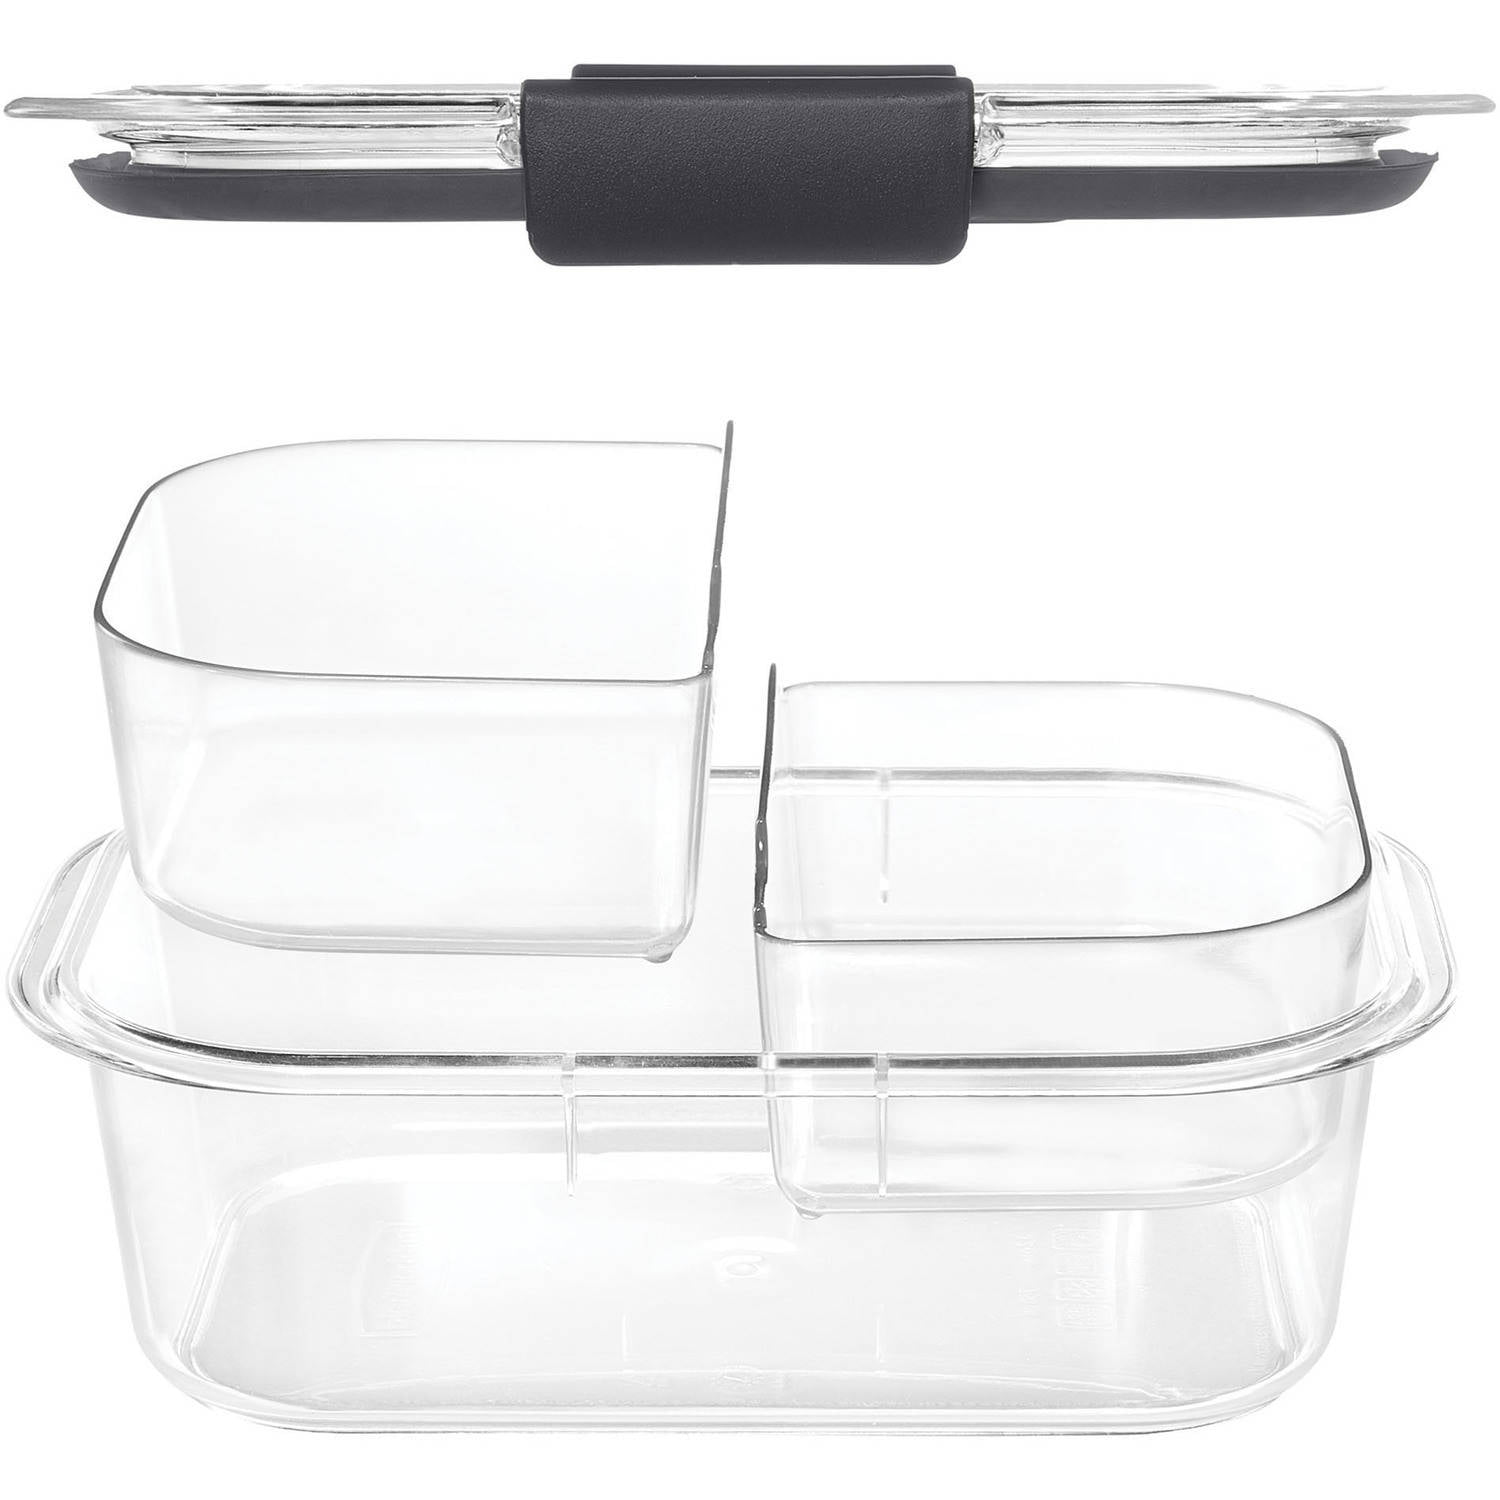 Rubbermaid® Brilliance Medium Containers - Clear, 3.2 c - Kroger